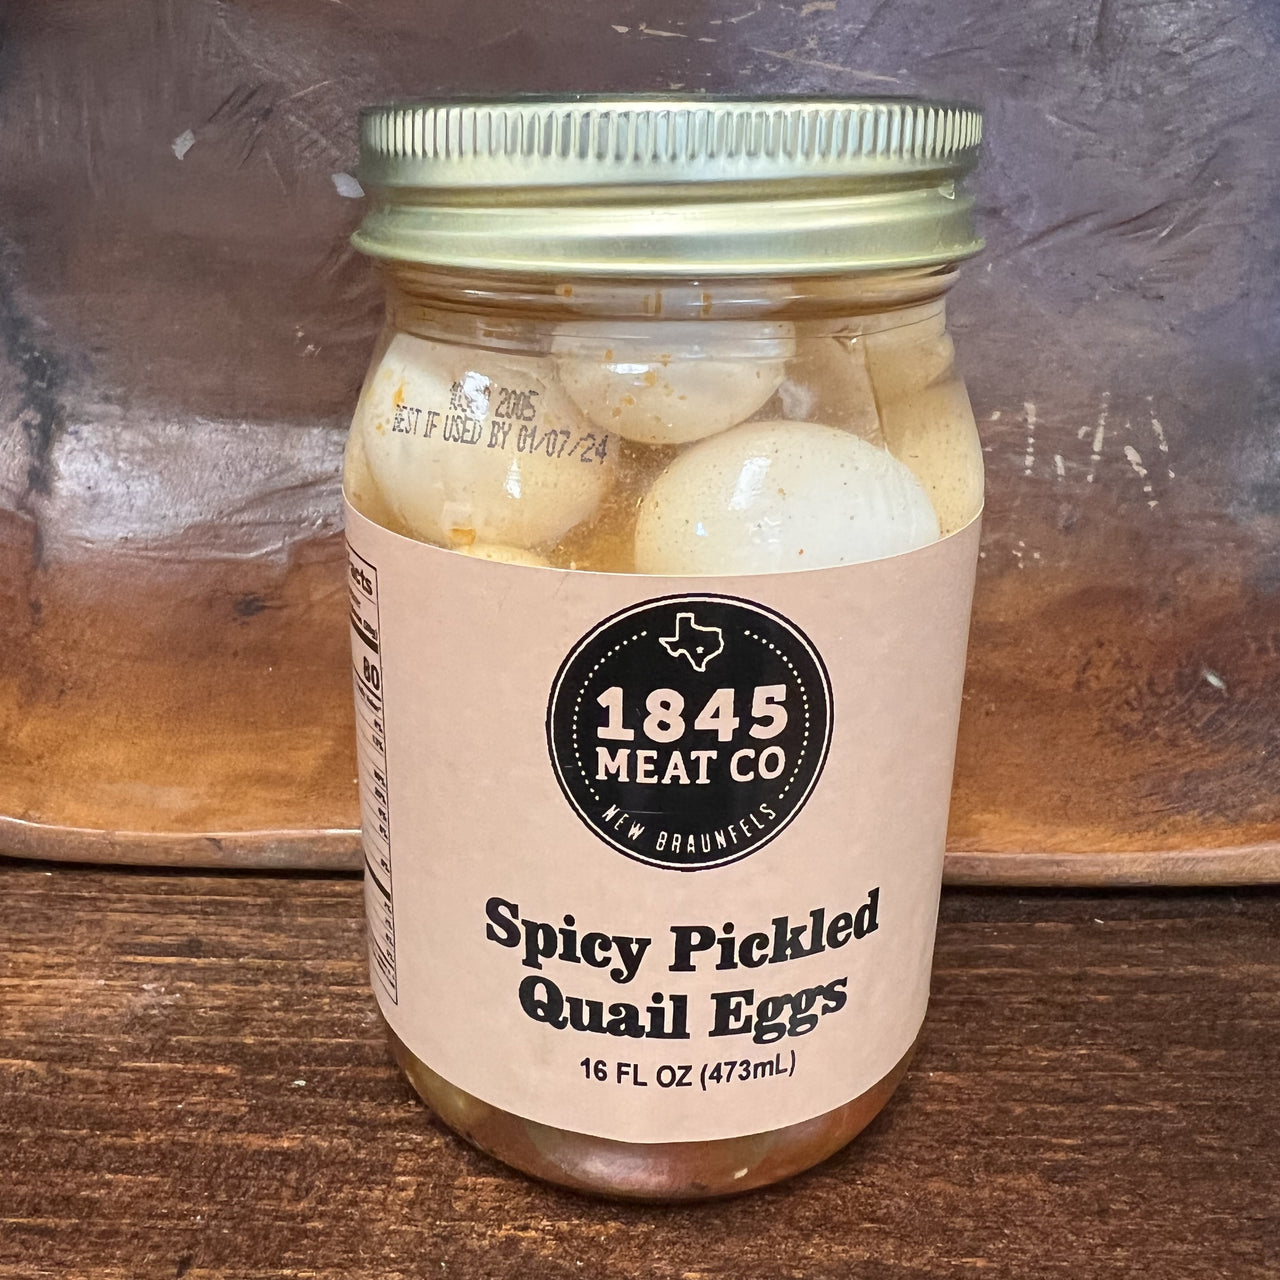 ﻿These Spicy Pickled Quail Eggs are the perfect addition to your Charcuterie Board, afternoon snack or late-night snack!